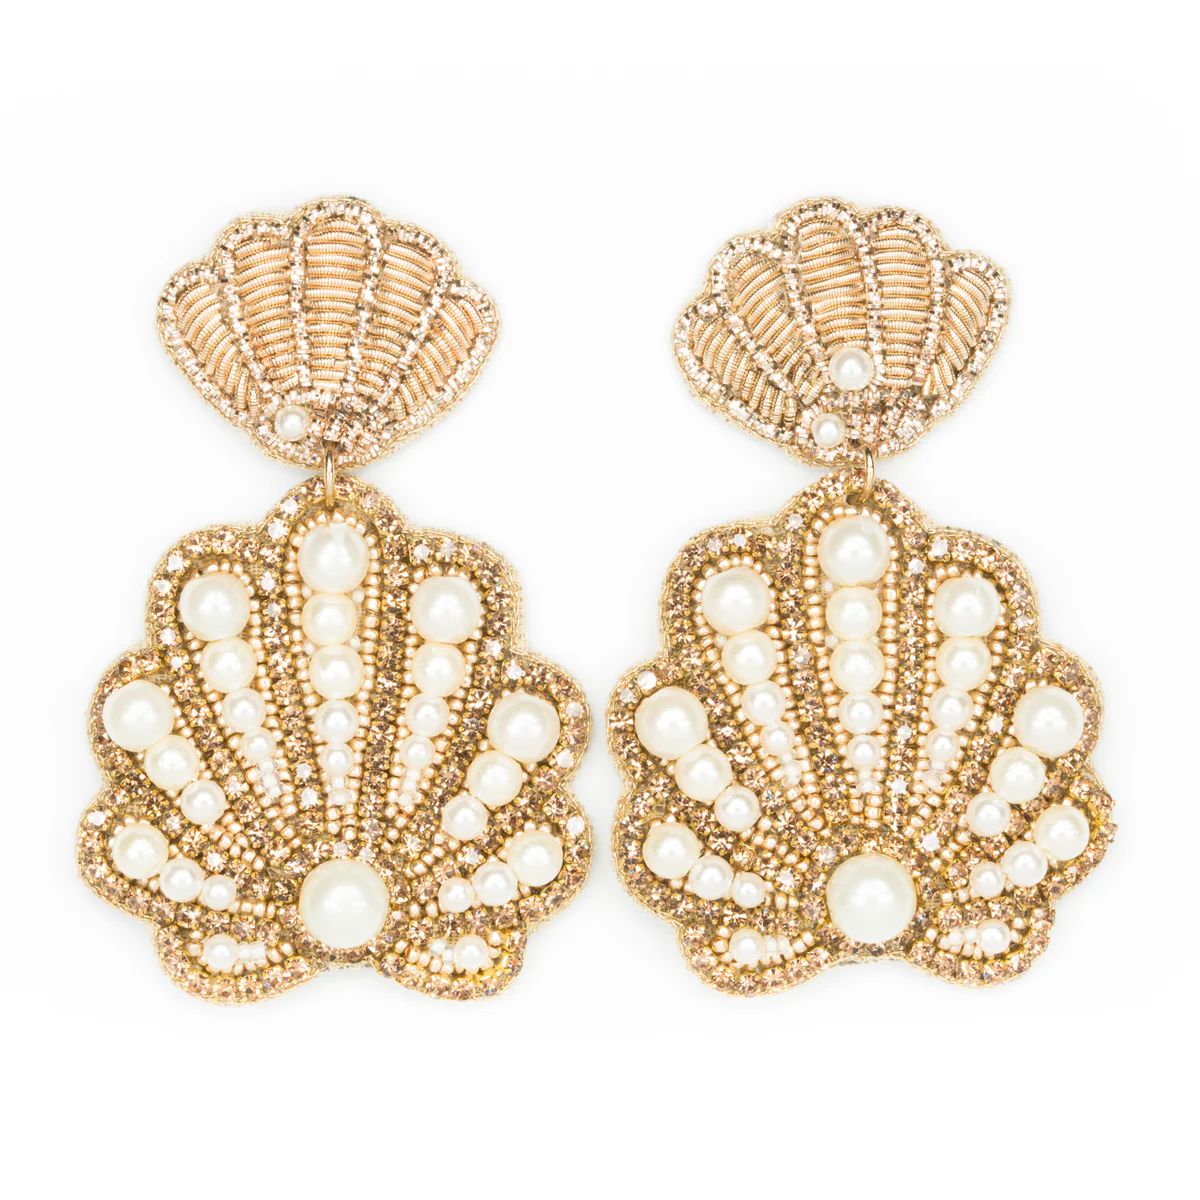 Gold and Pearl Seashell Earrings - Larger Size | Beth Ladd Collections